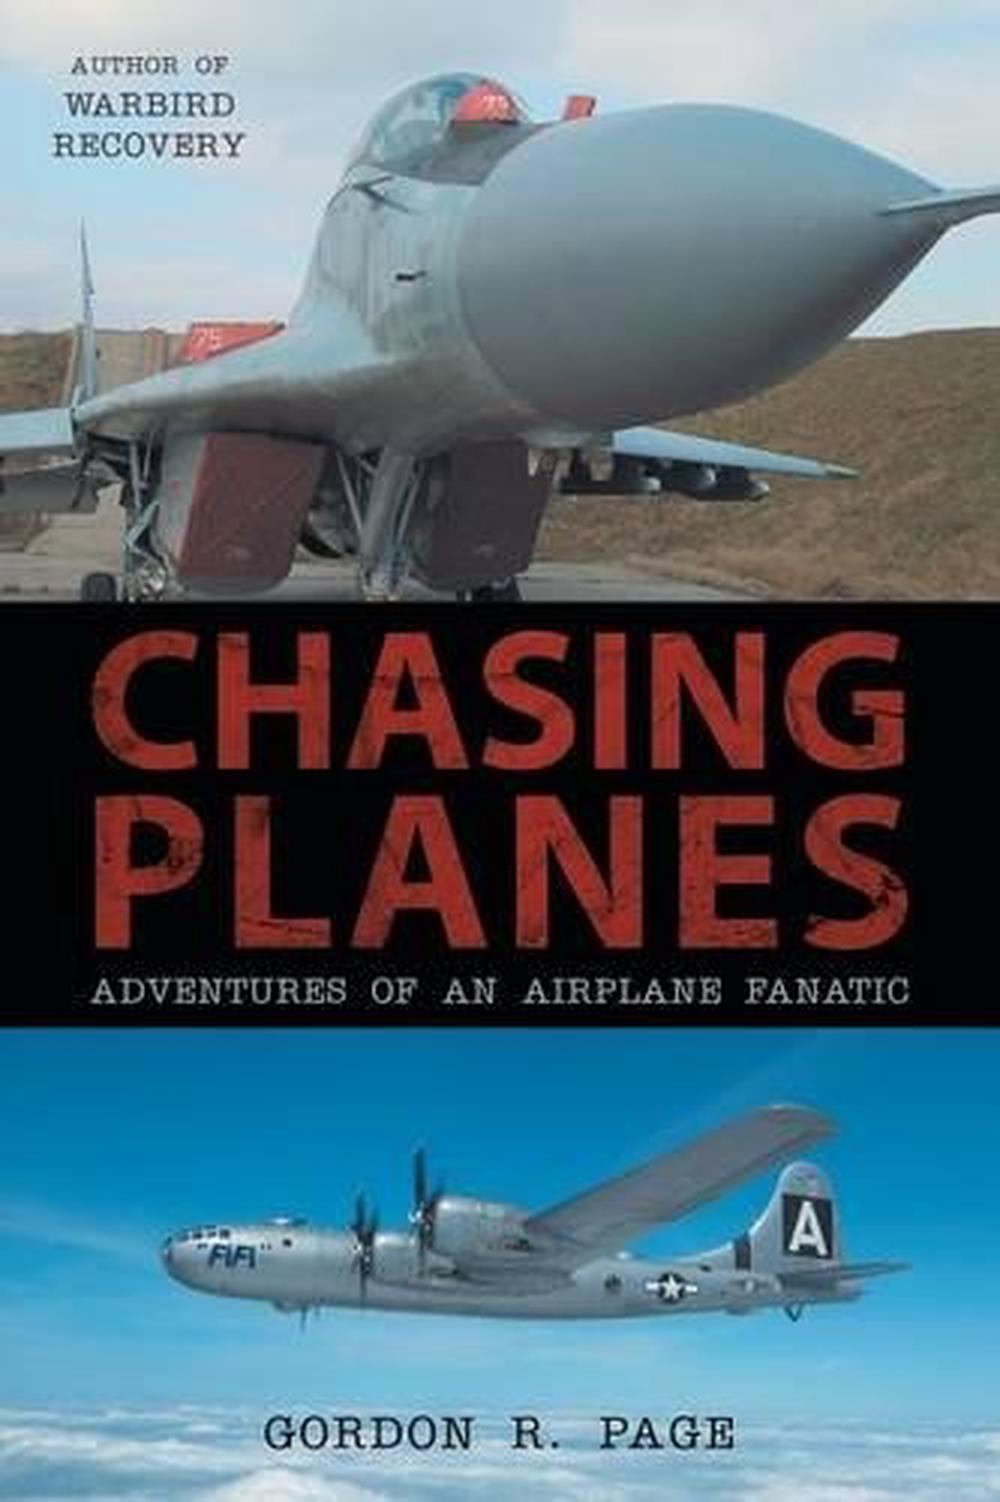 Chasing Planes: Adventures of an Airplane Fanatic by Gordon R. Page ...